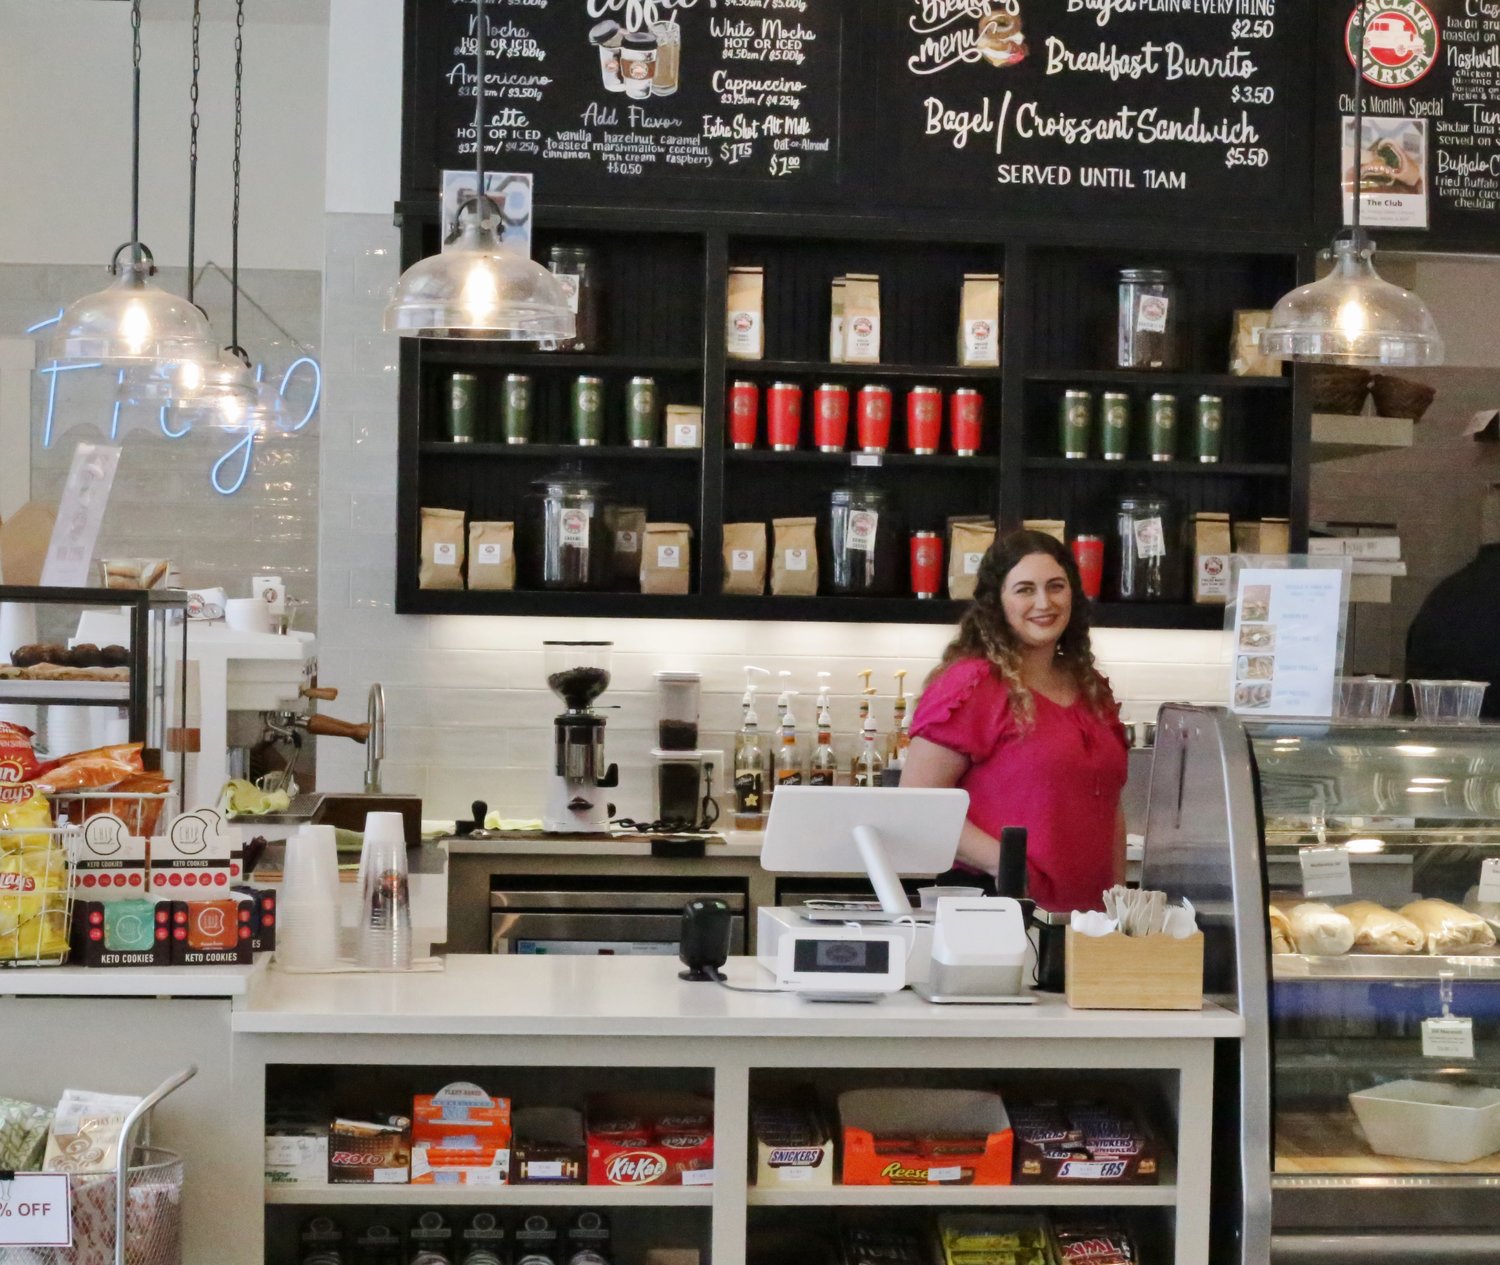 The business counter at the market, with operations manager Kaitlynn Rush.